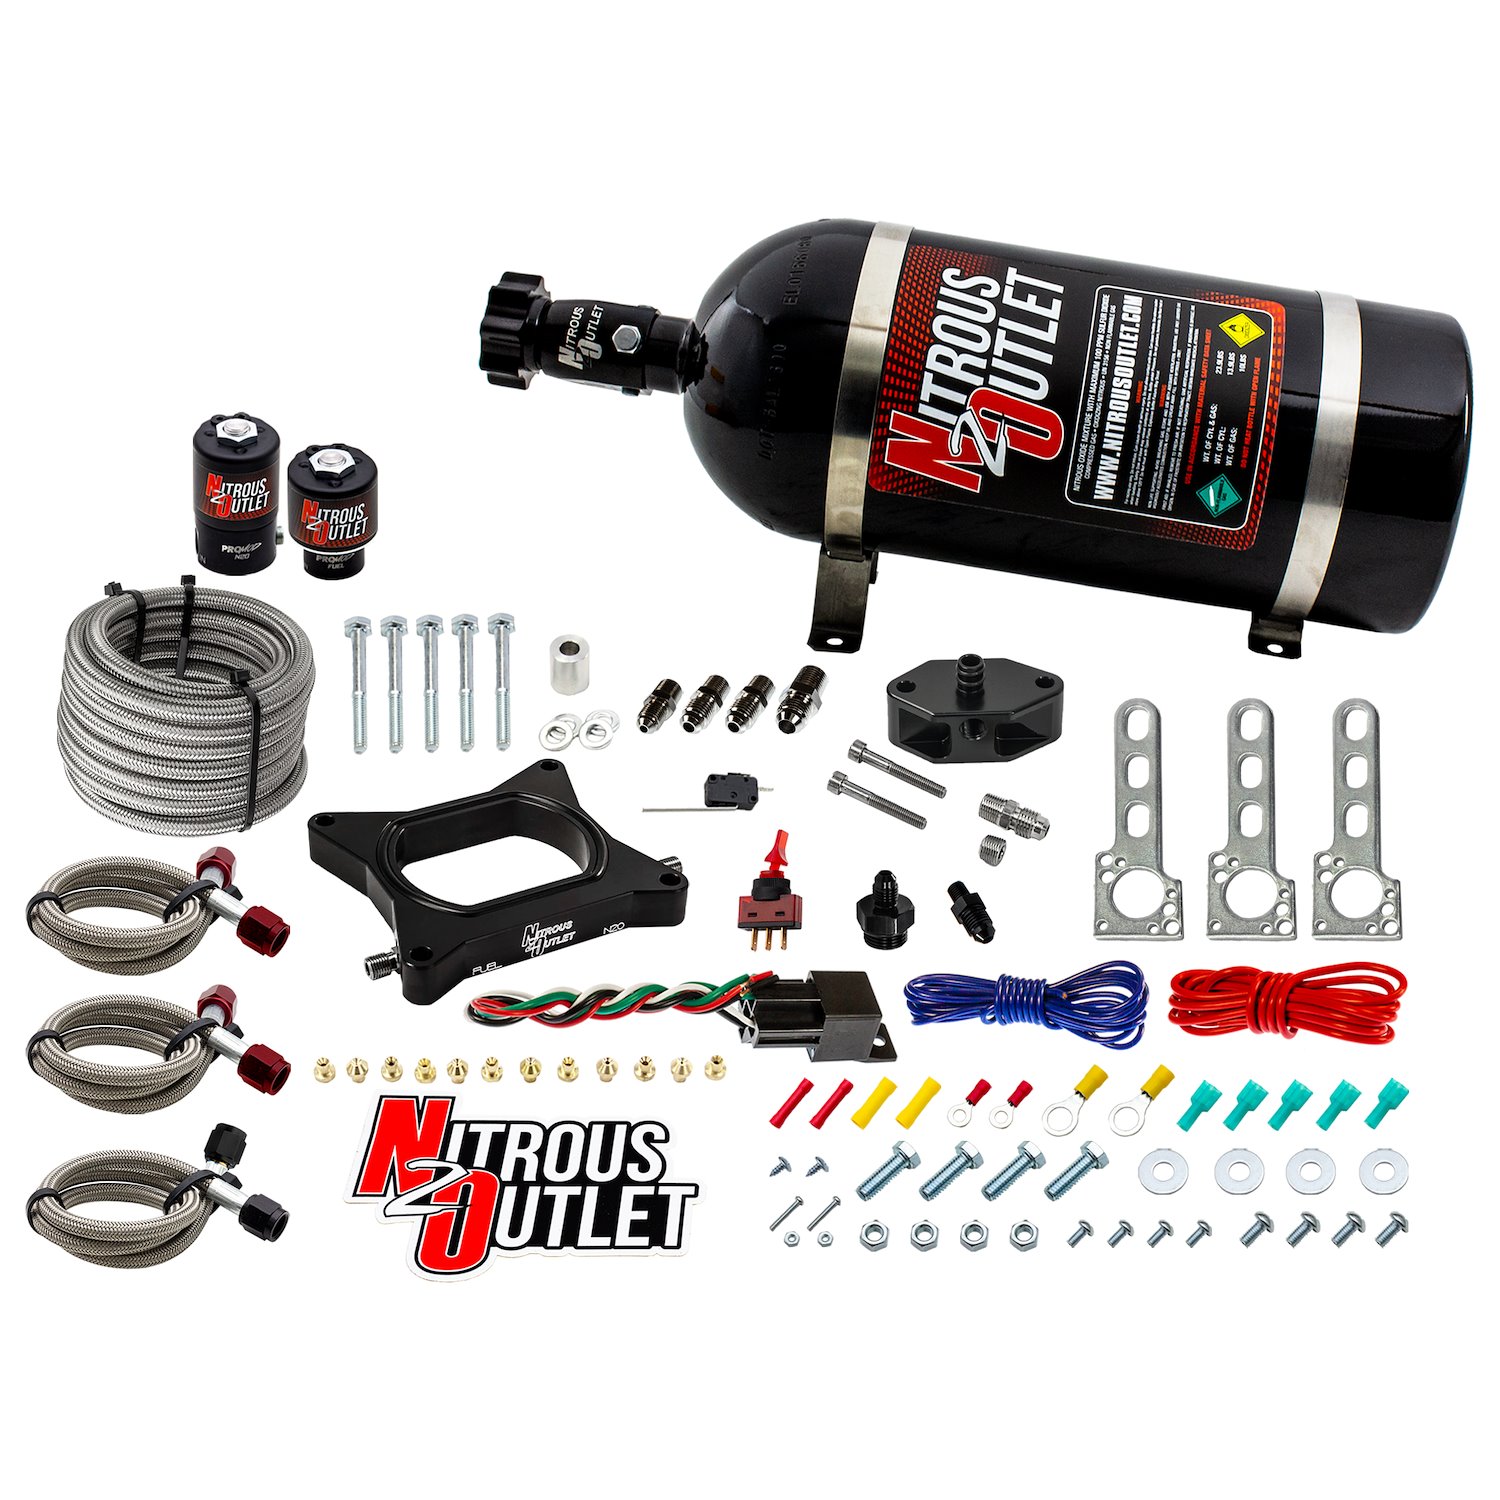 00-10140-10 Ford 1996-2004 4.6L 2V Mustang Plate System, Gas/E85, 5-55psi, 50-200HP, 10lb Bottle